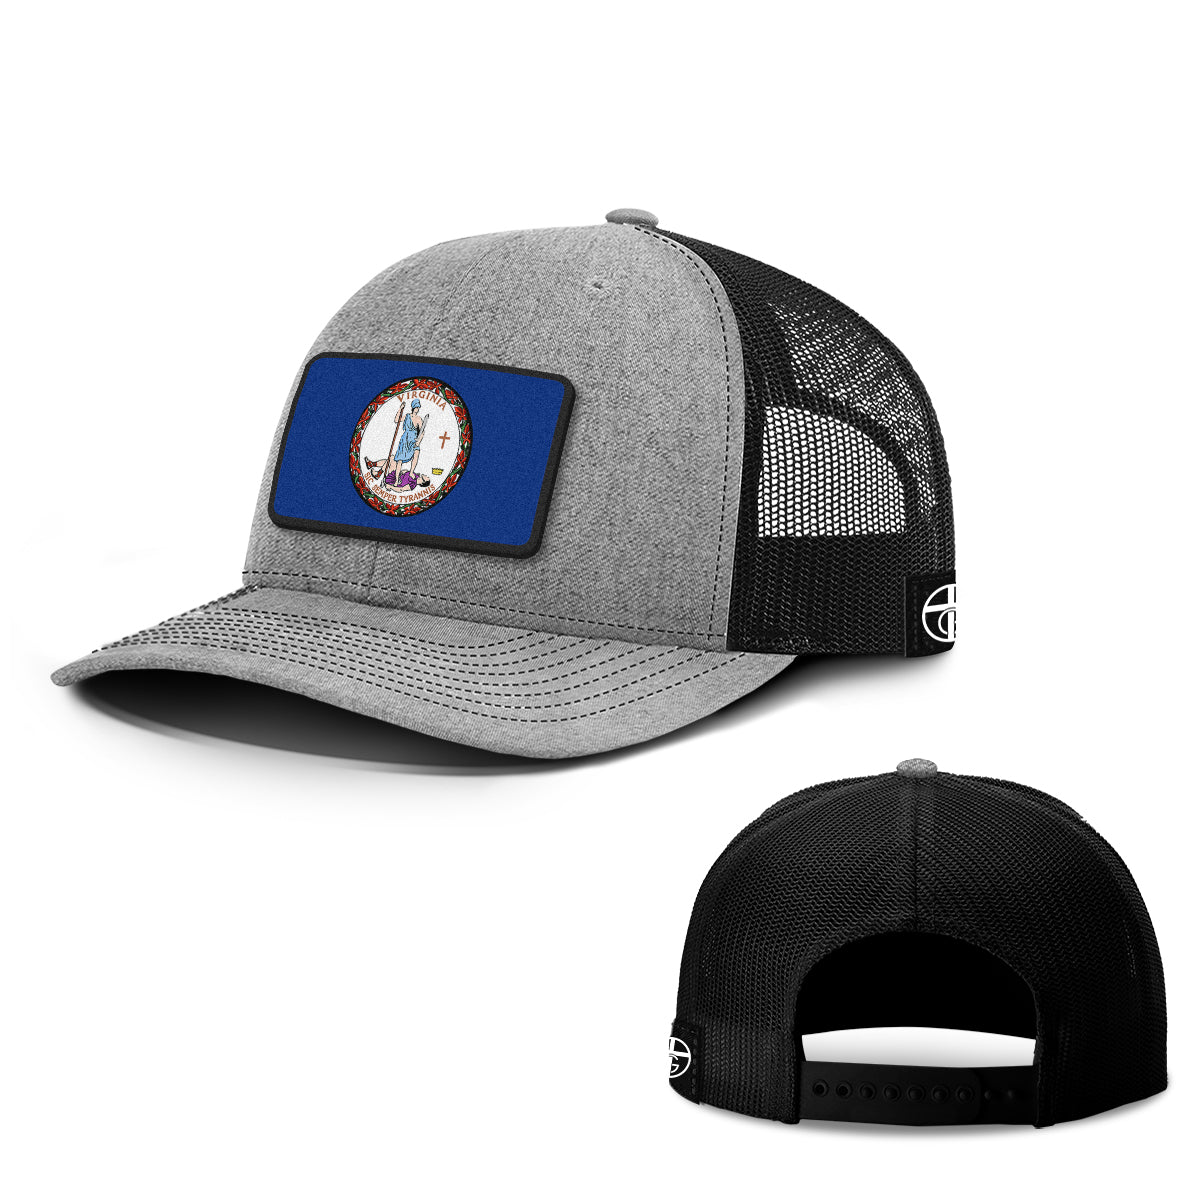 Virginia is God’s Country Patch Hats